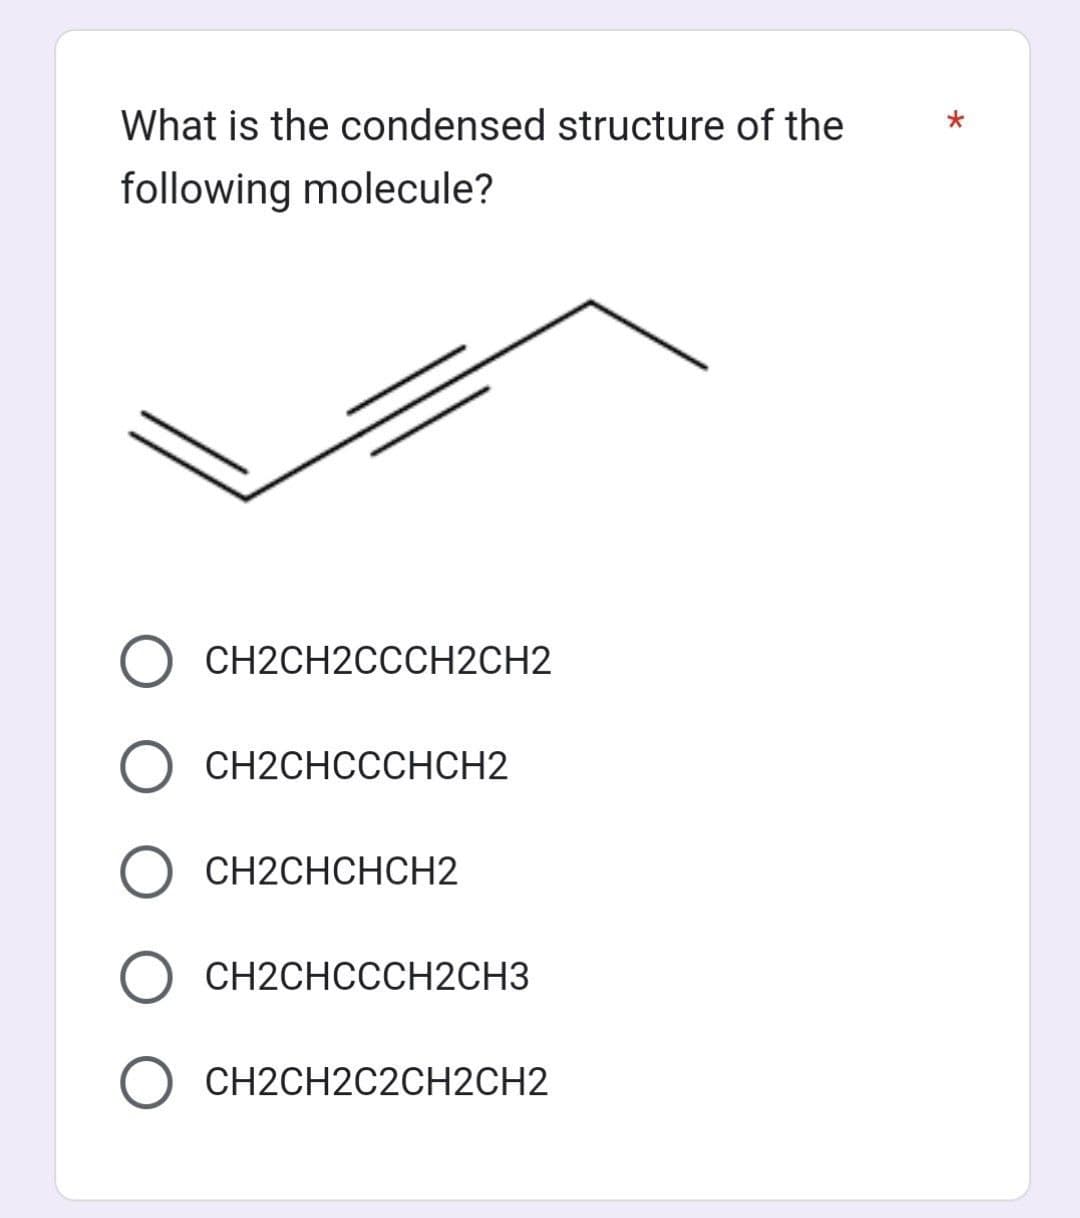 What is the condensed structure of the
following molecule?
CH2CH2CCCH2CH2
O CH2CHCCCHCH2
O CH2CHCHCH2
CH2CHCCCH2CH3
O CH2CH2C2CH2CH2
*